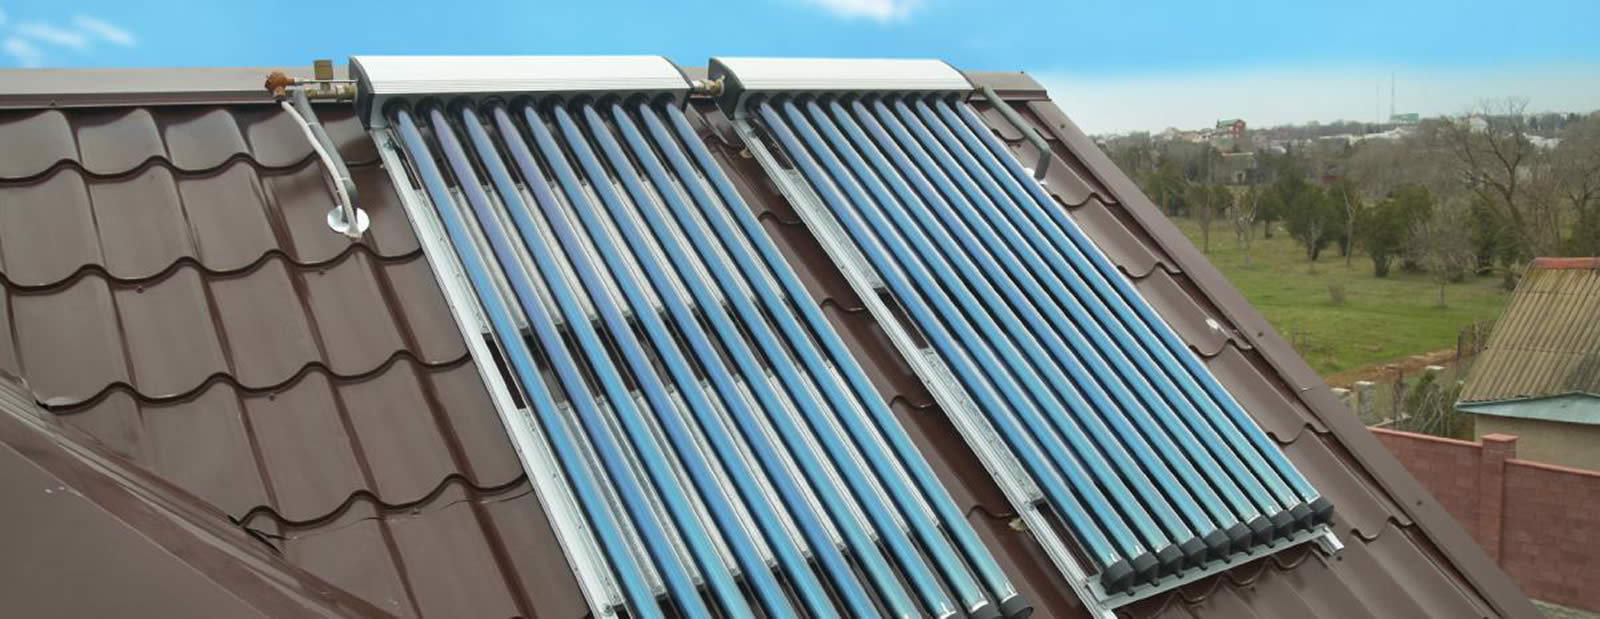 Peter Brown Solar Heating Services in Harrow